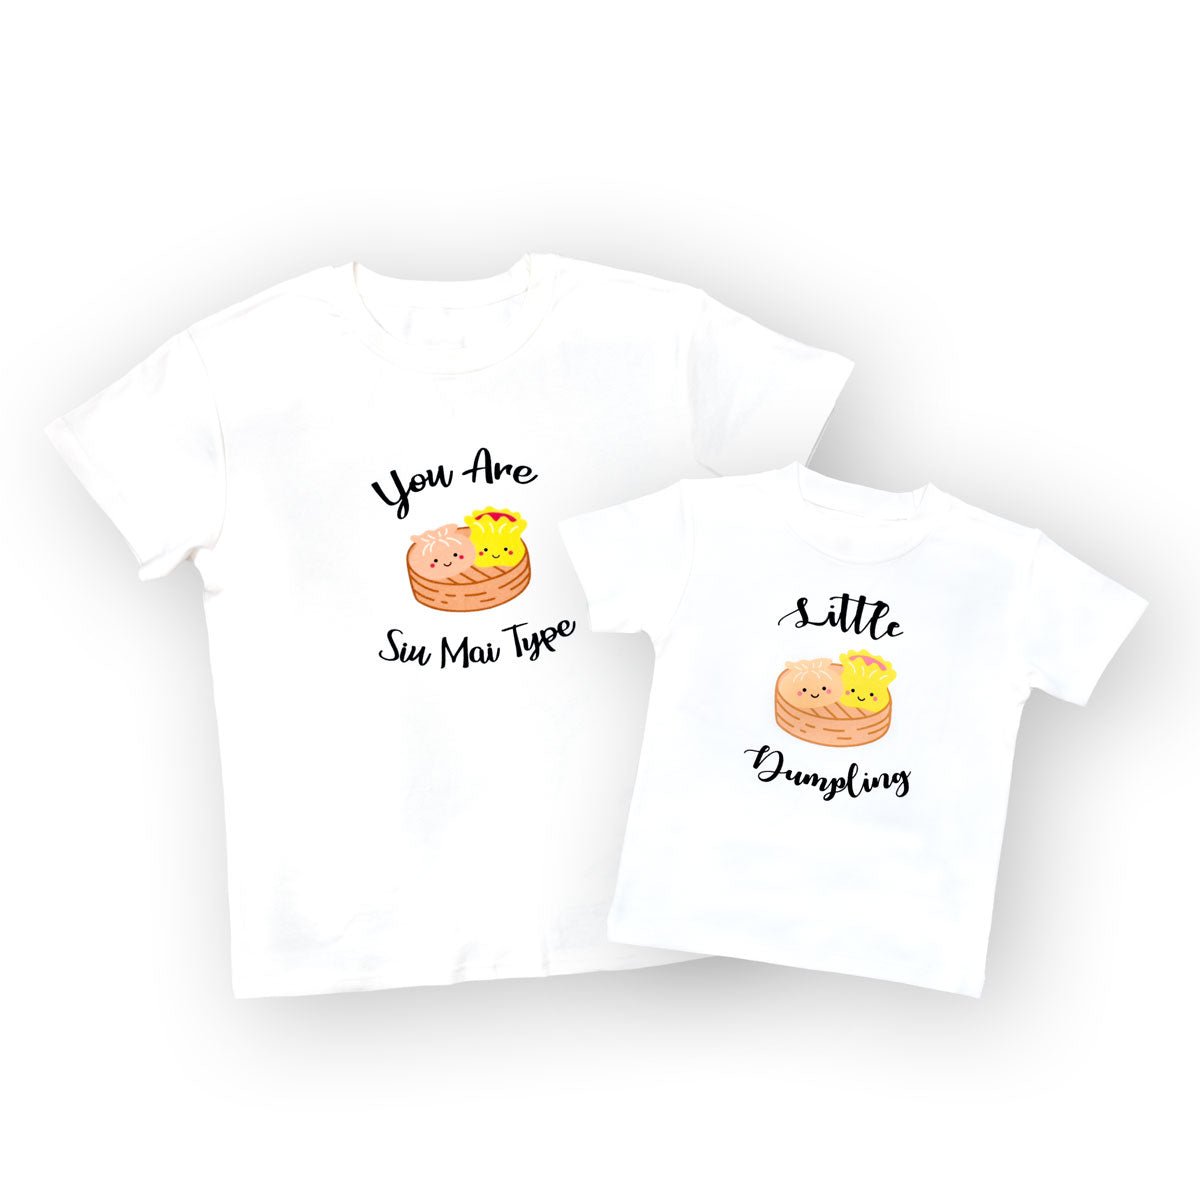 the wee bean organic cotton super soft mommy and me twinning matching t-shirts adult women teen t-shirt in dim sum you are all that and siu mai